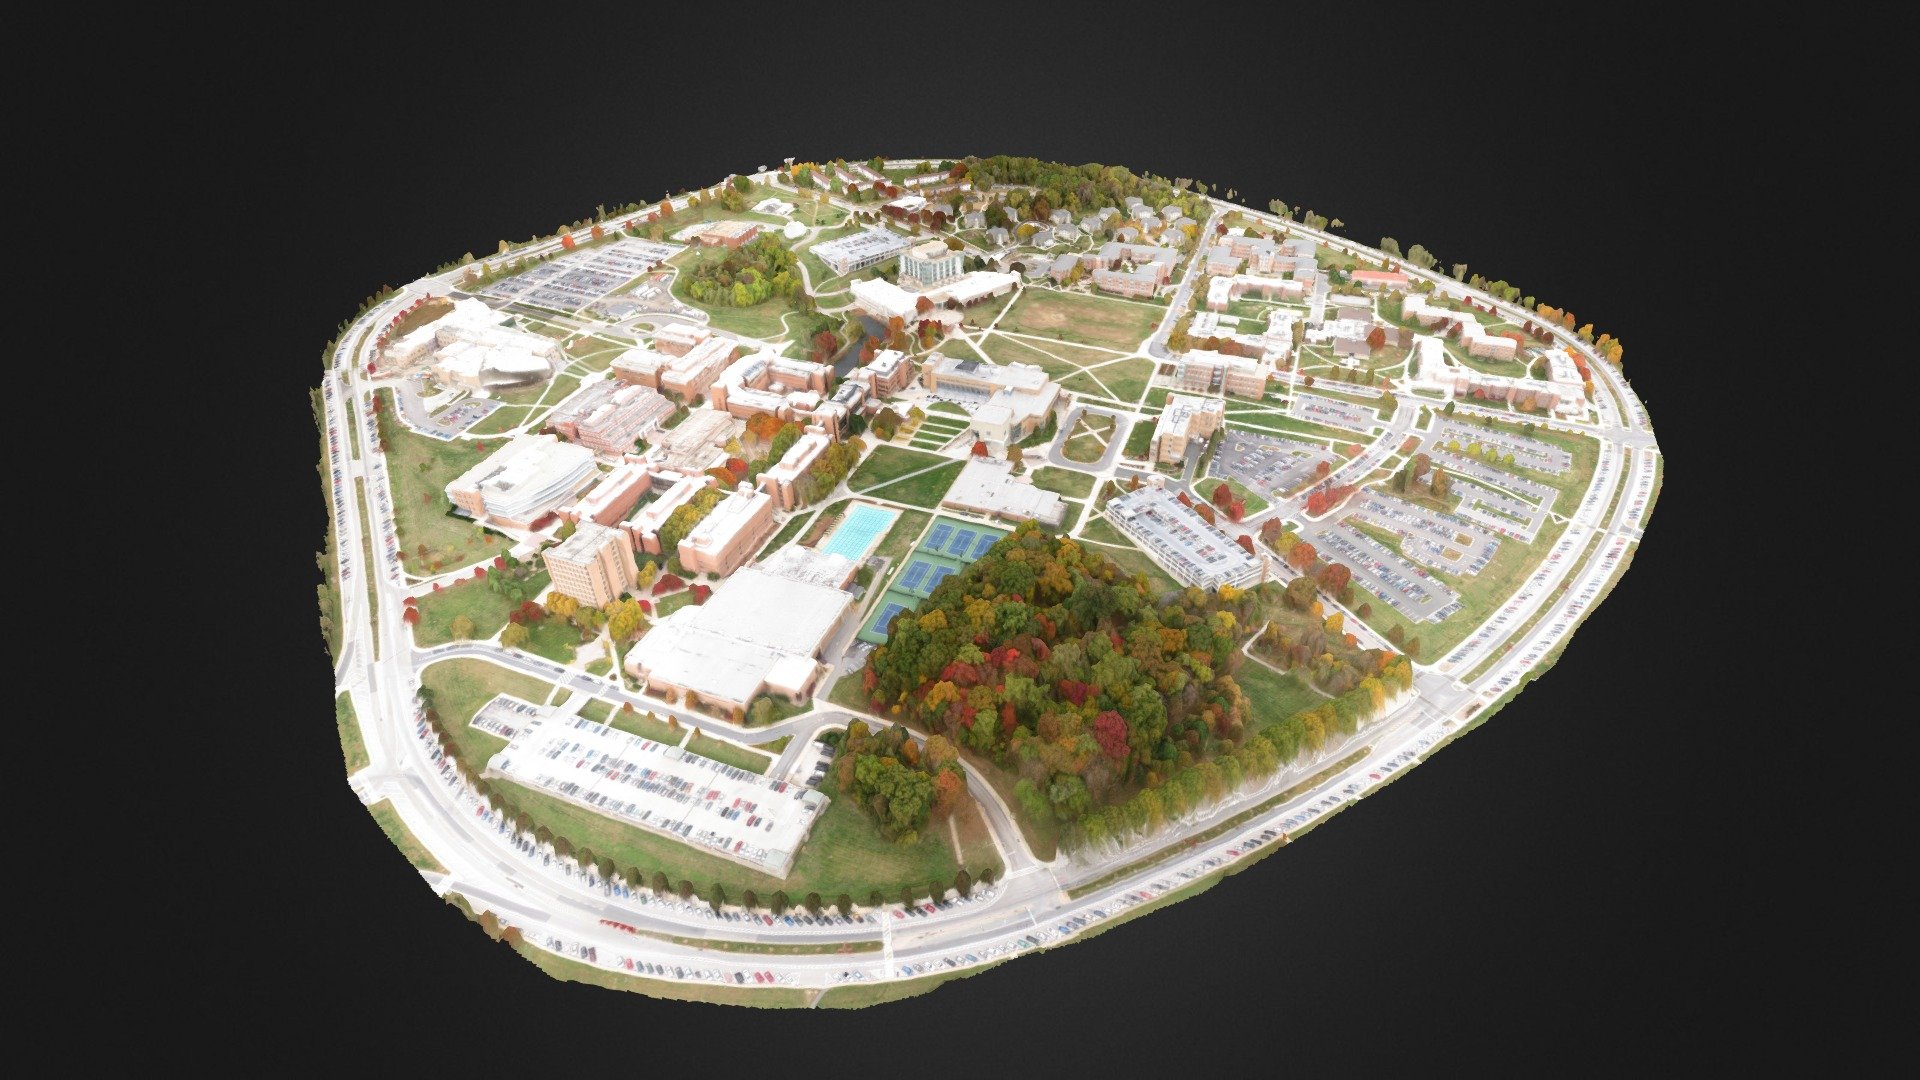 A 3D aerial scan of the UMBC campus.  5443 photos were processed through Agisoft Photoscan.  The photos were collected via an Arducopter-octo.  This model has been highly decimated to allow display on Sketchfab 3d model